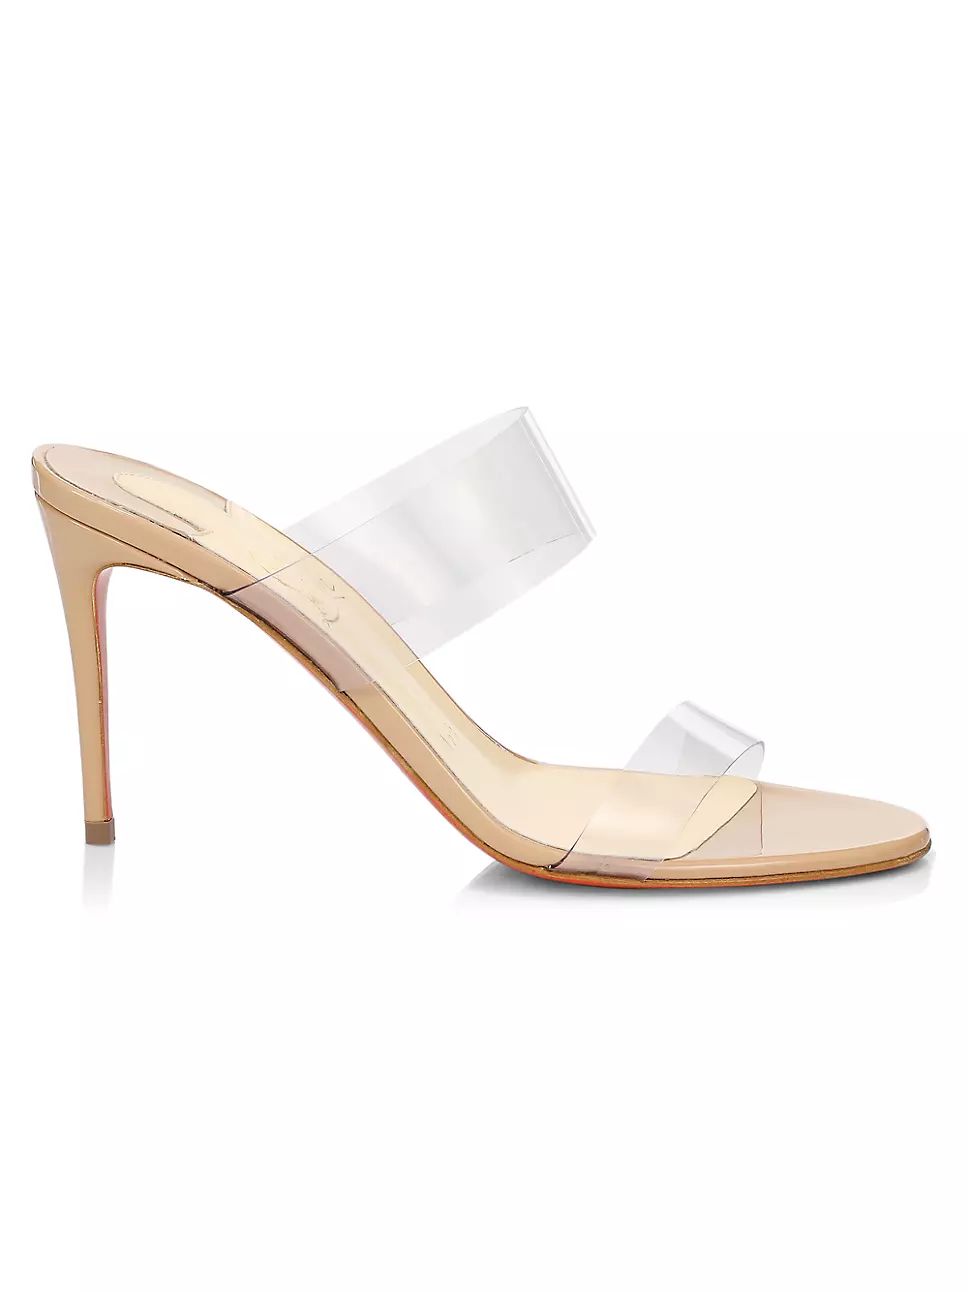 Christian Louboutin Just Nothing 85 PVC &amp; Patent Leather Mules | Saks Fifth Avenue